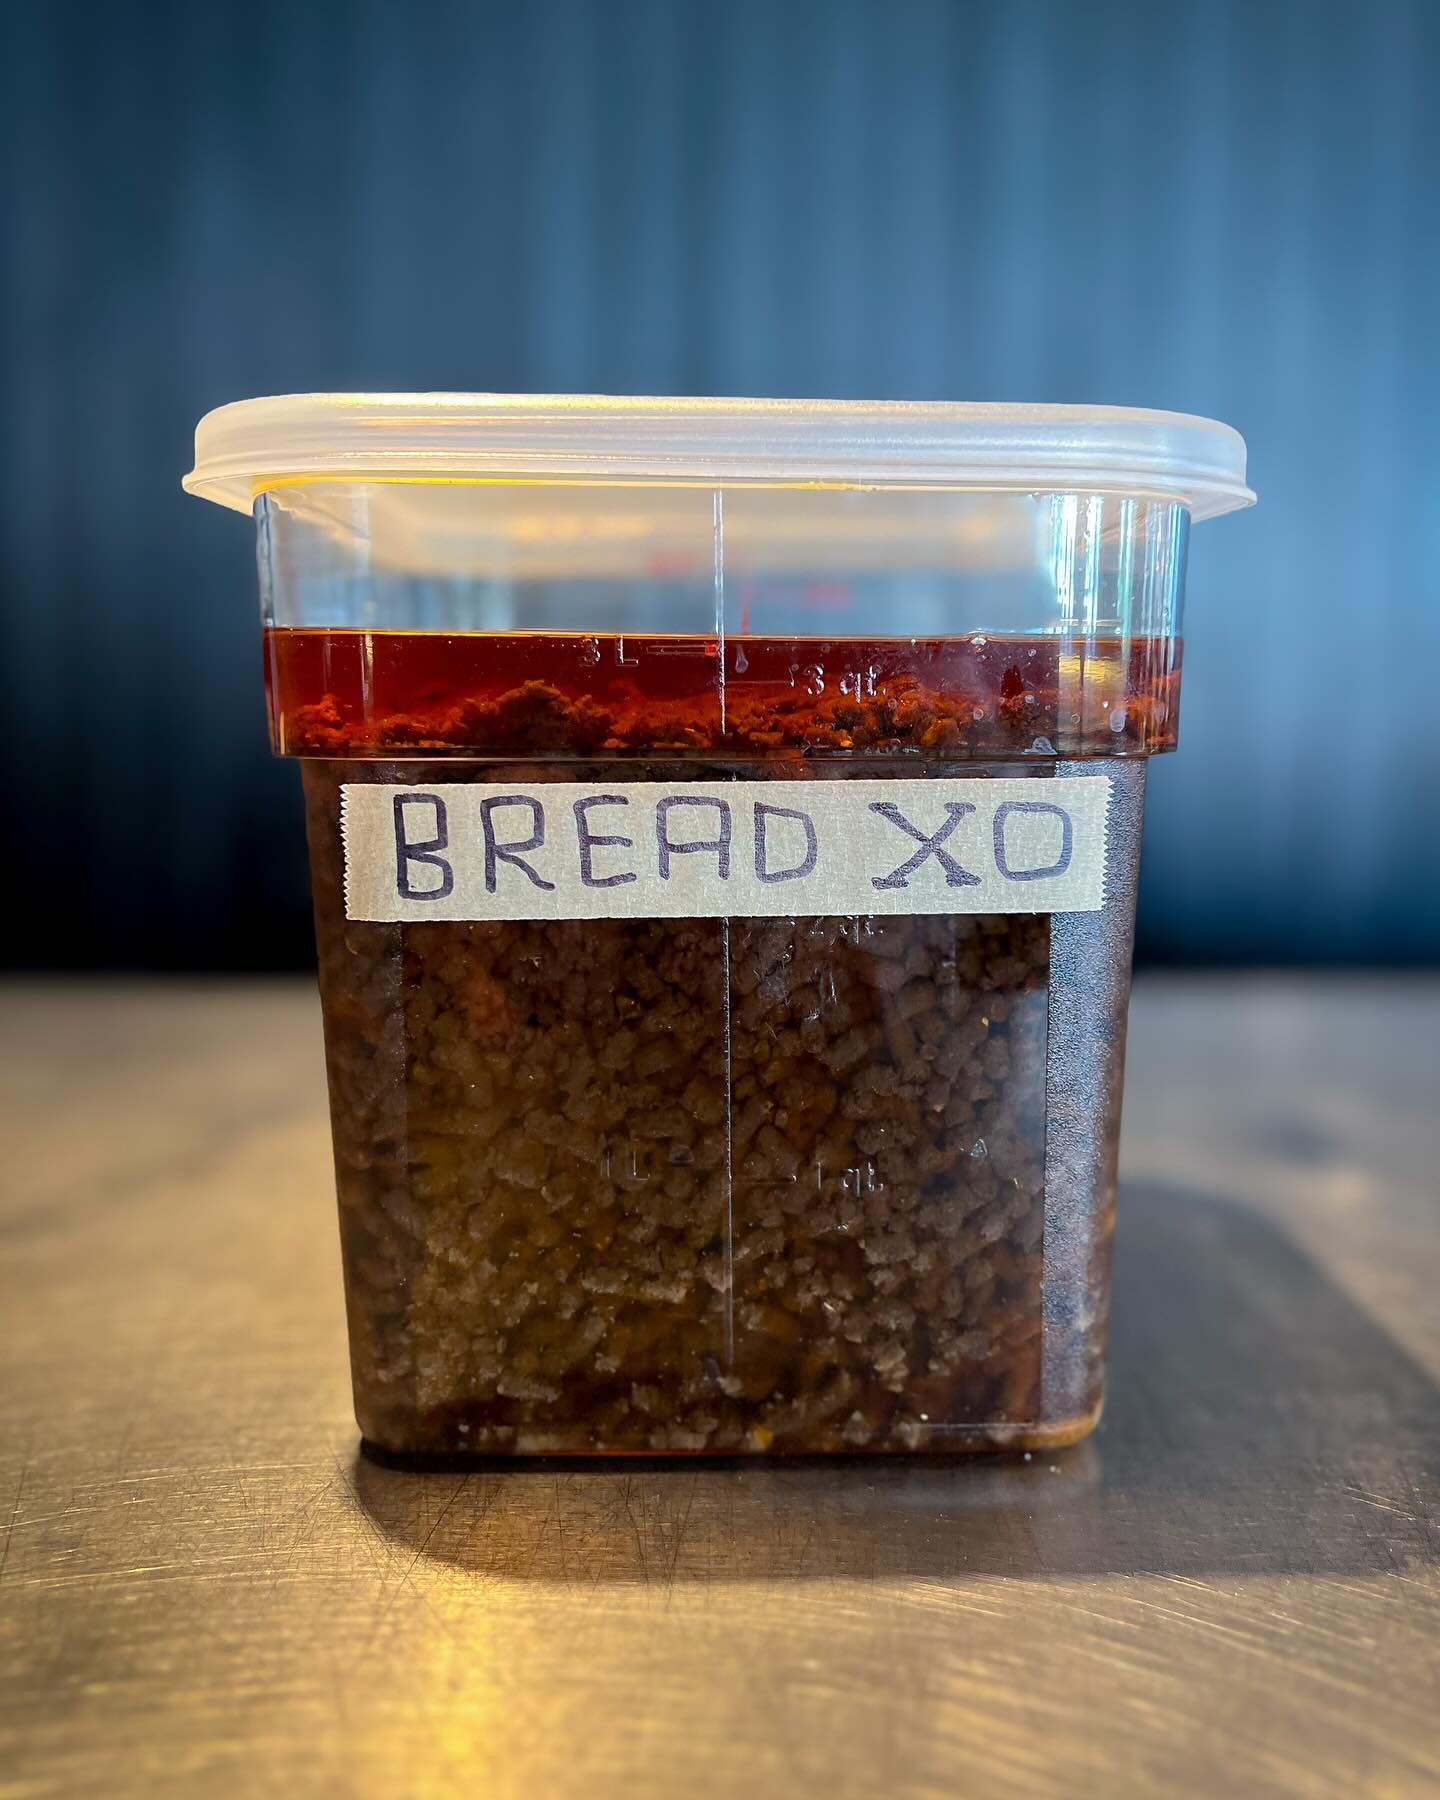 THE BIRTH OF BREAD XO

Bread is no1 Wasted product in the Uk &amp; the US. Unsurprisingly it&rsquo;s the no1 surplus product in Silo. 
It&rsquo;s in the shadow of this &lsquo;bread mountain&rsquo; we find endless creativity. 

🥖Marmite
🥖Bread Miso
